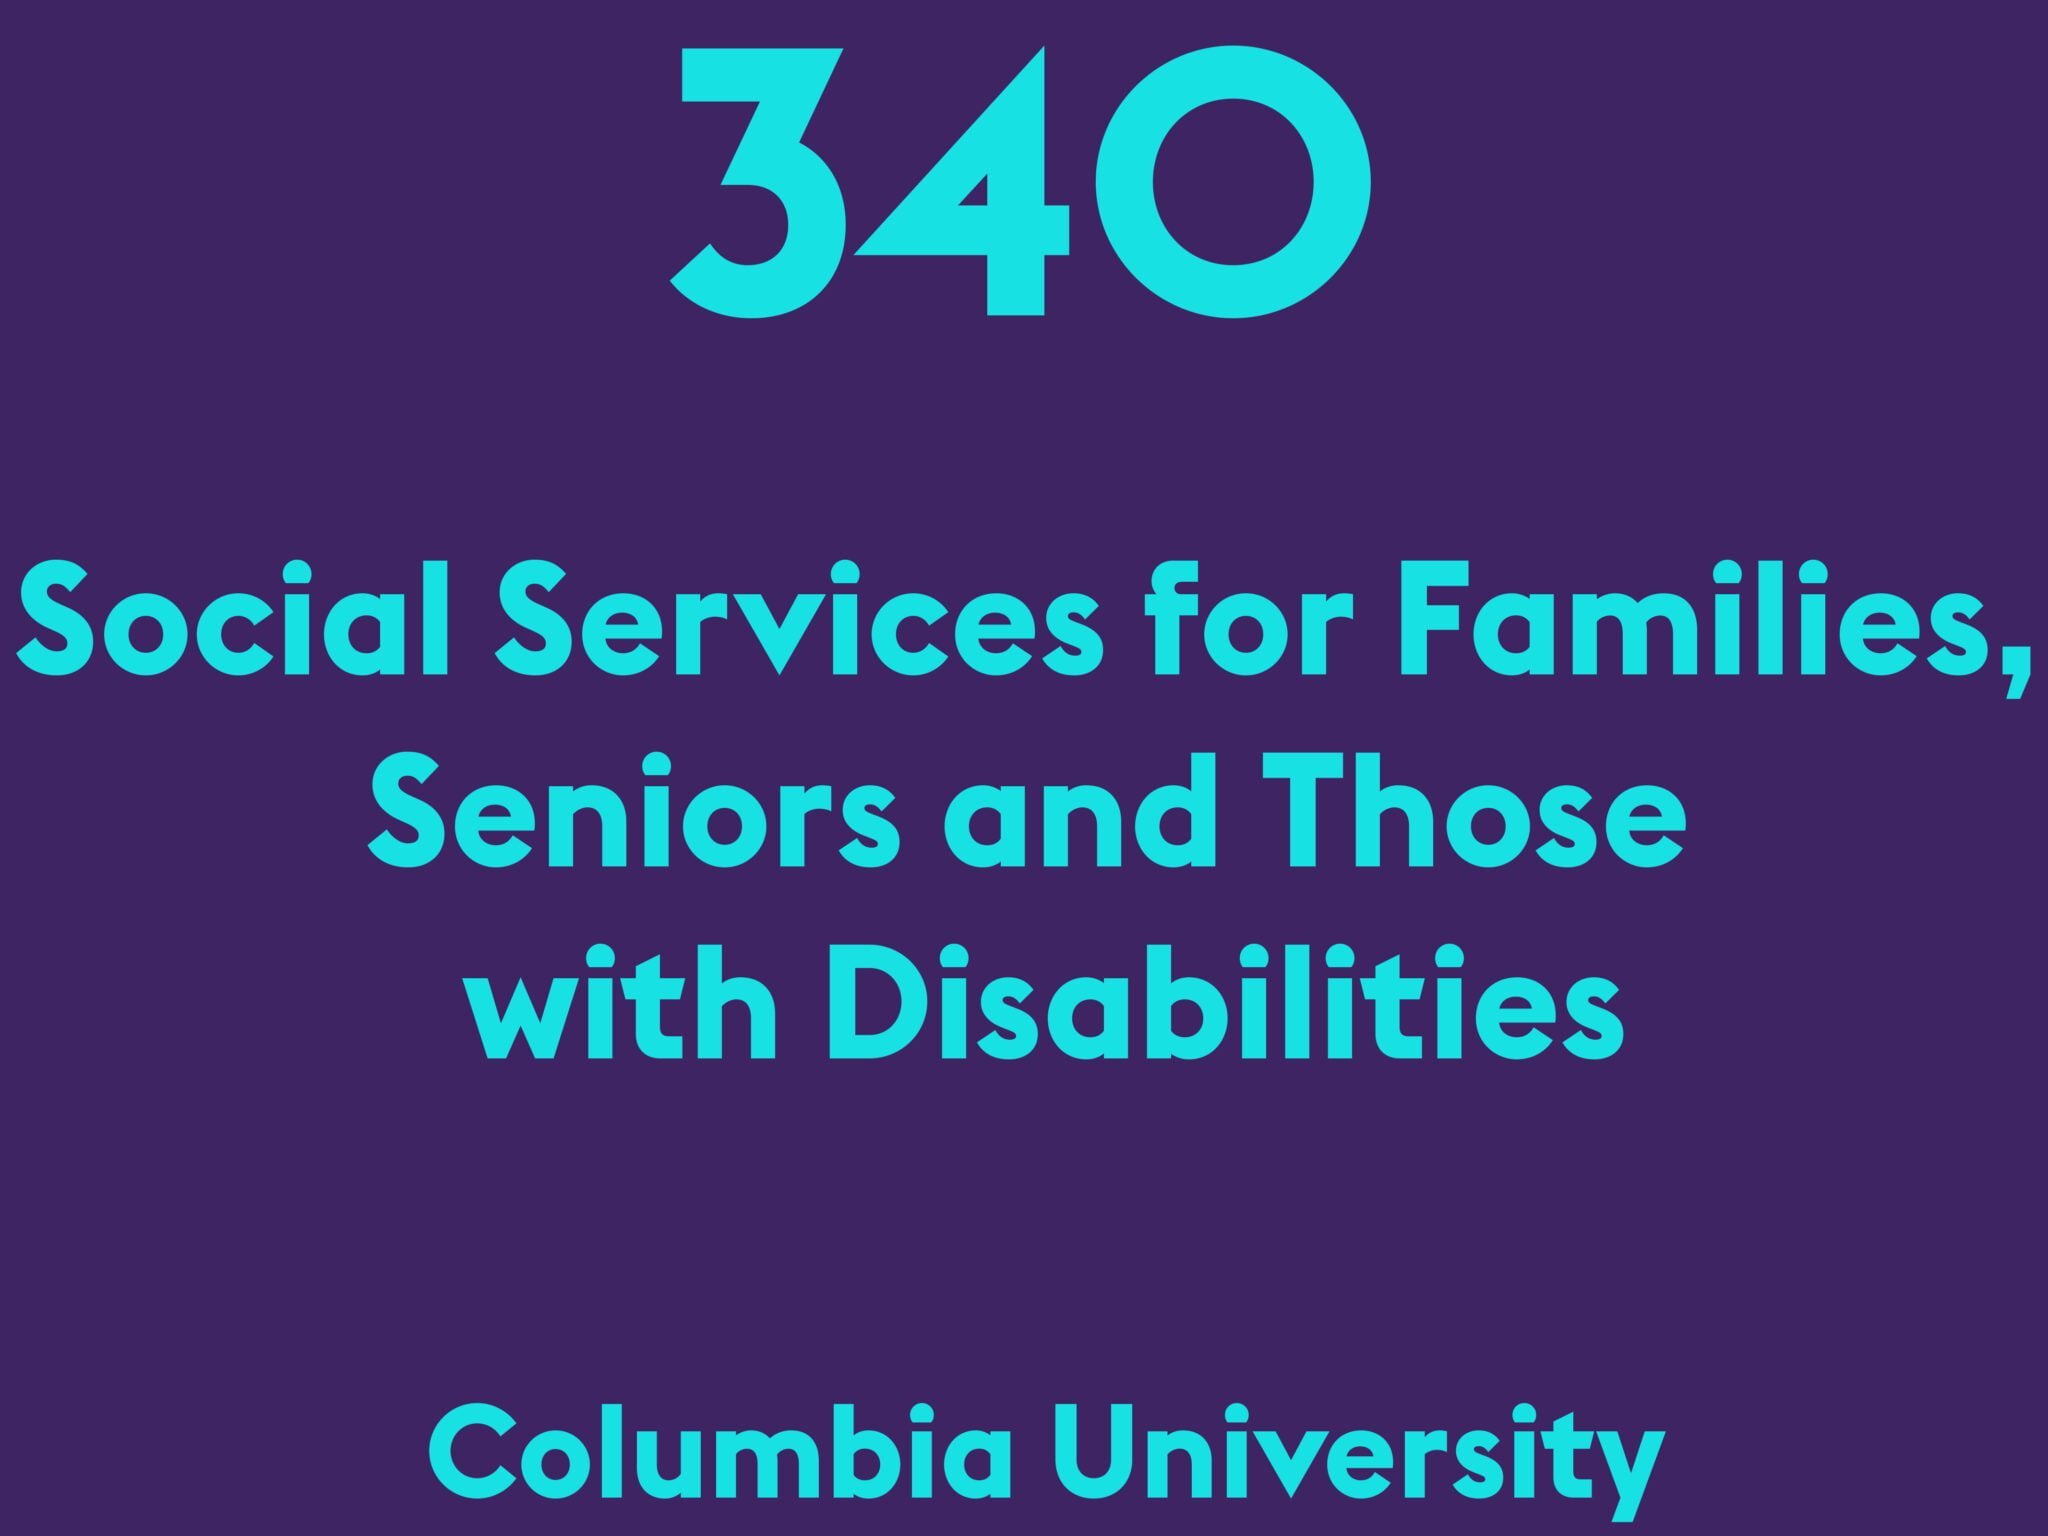 Social Services for Families